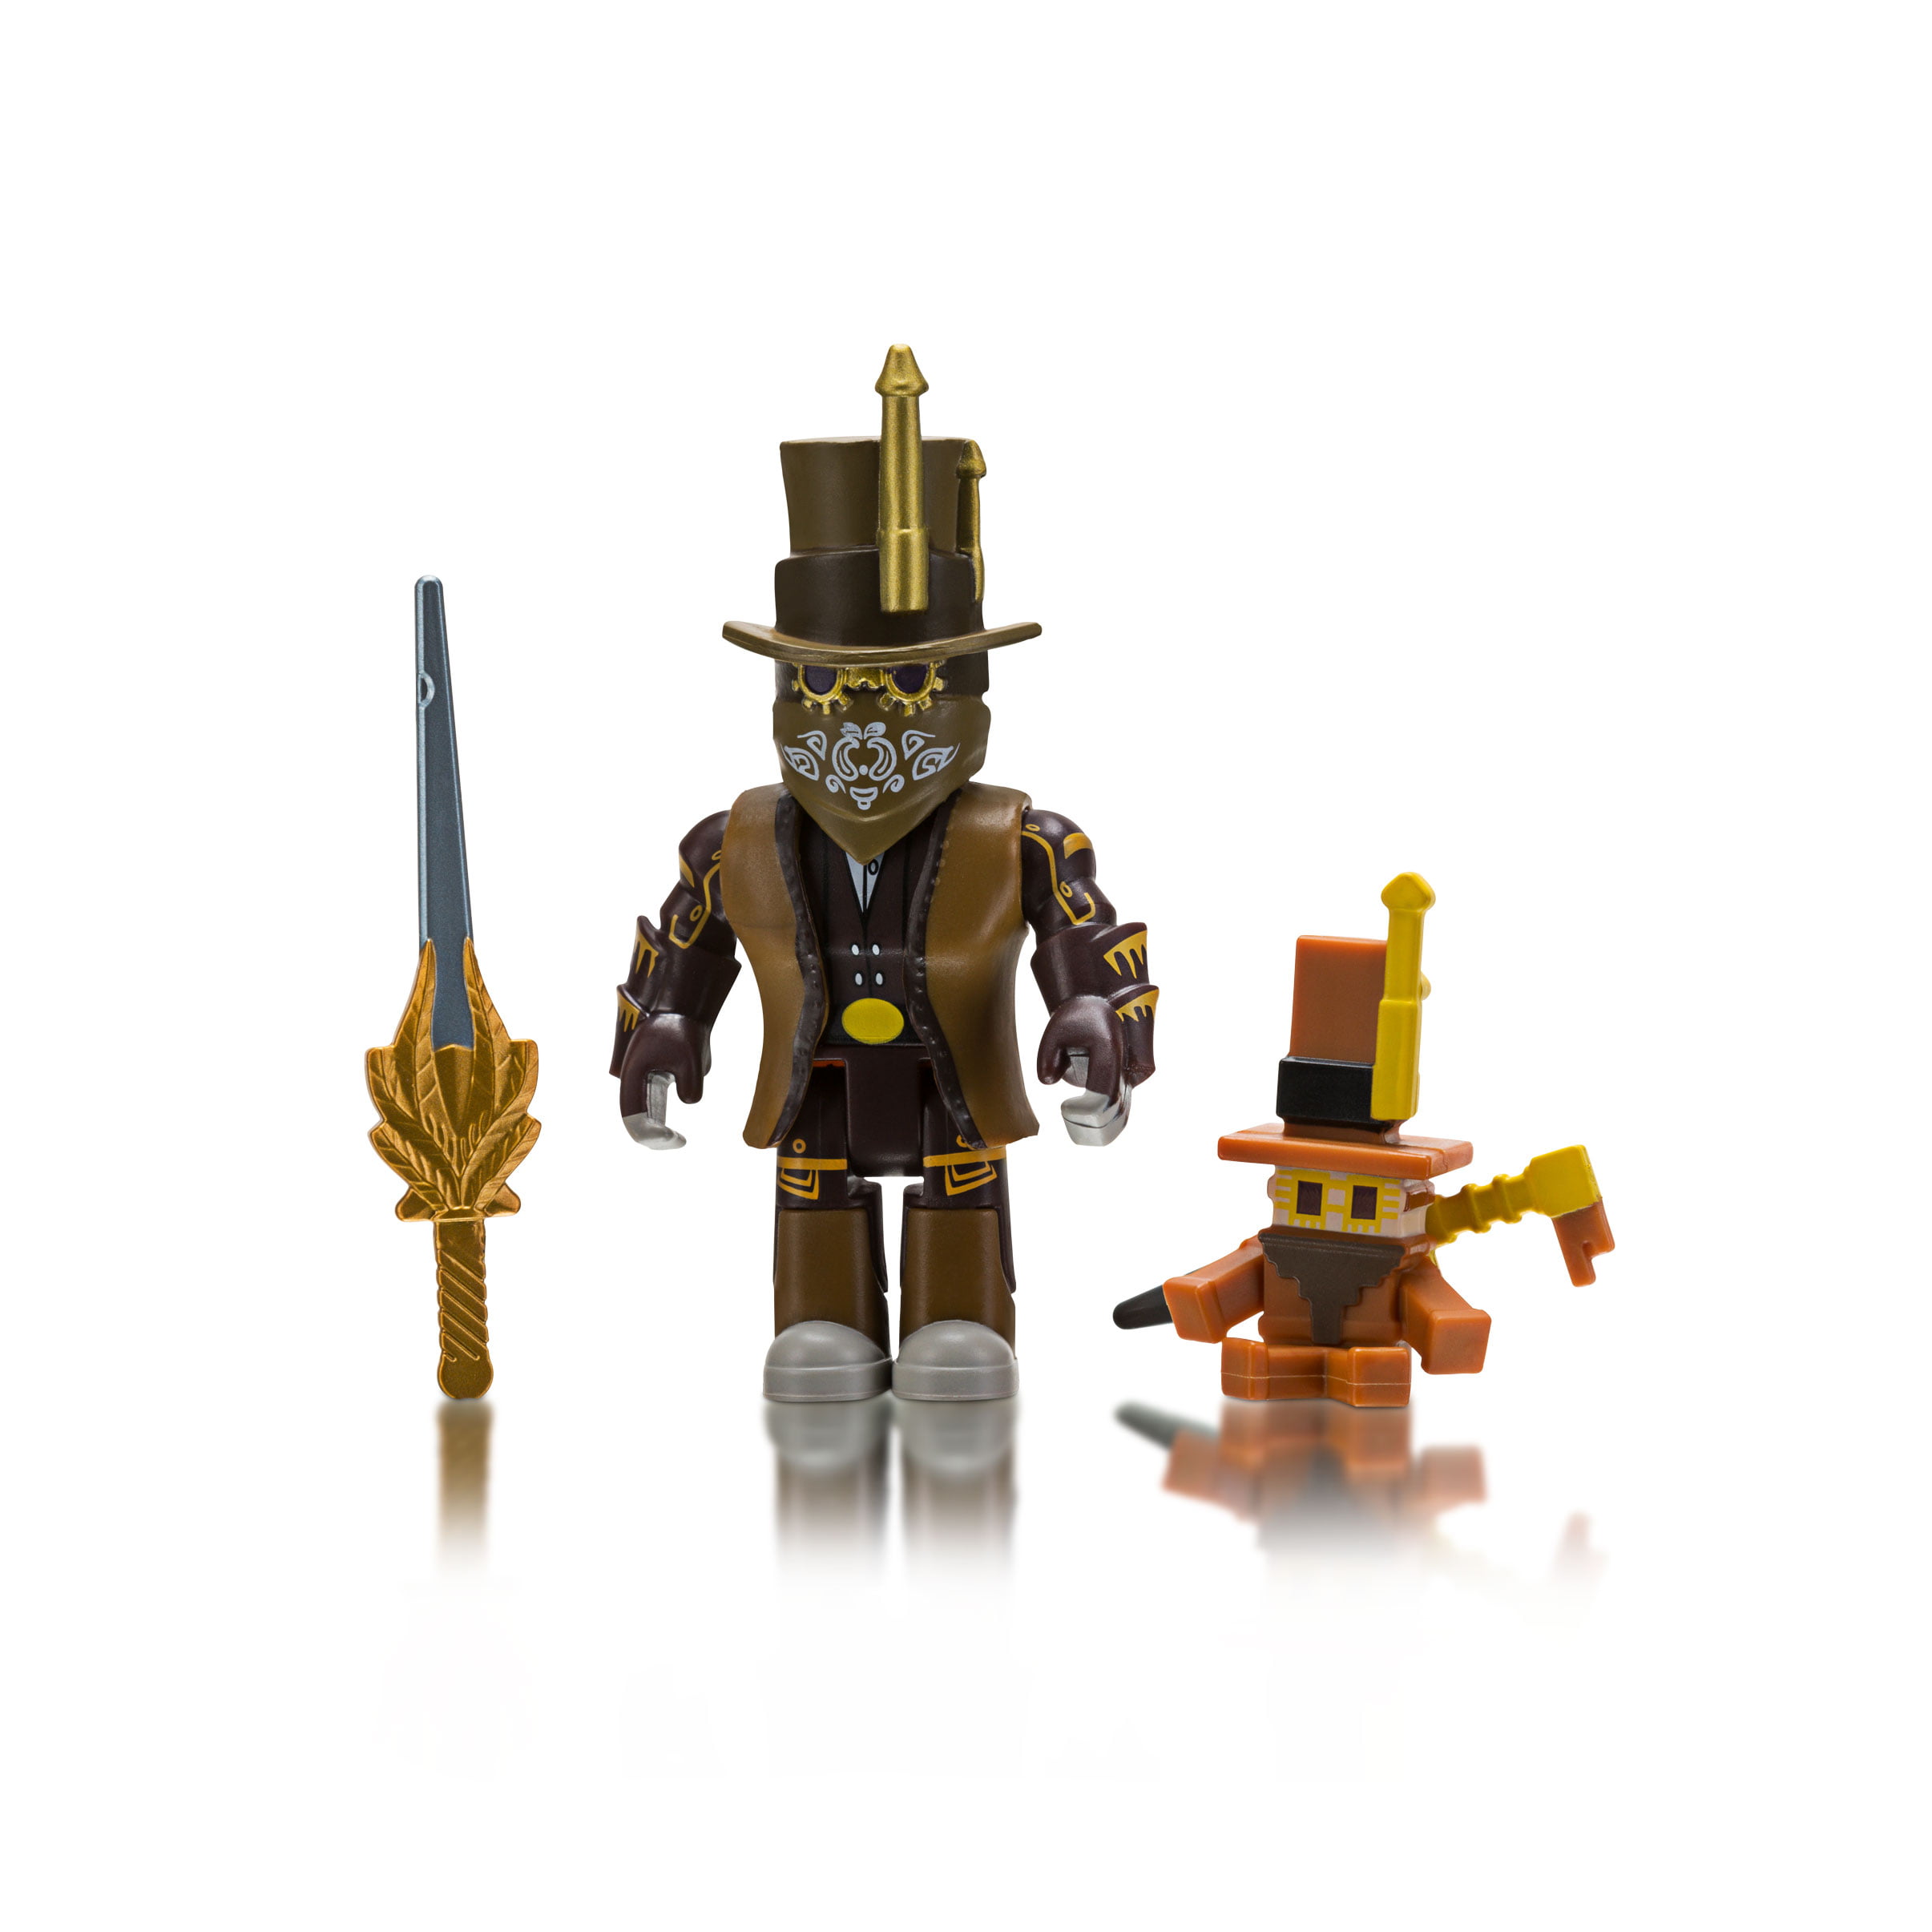 List Of Roblox Toy Accessories